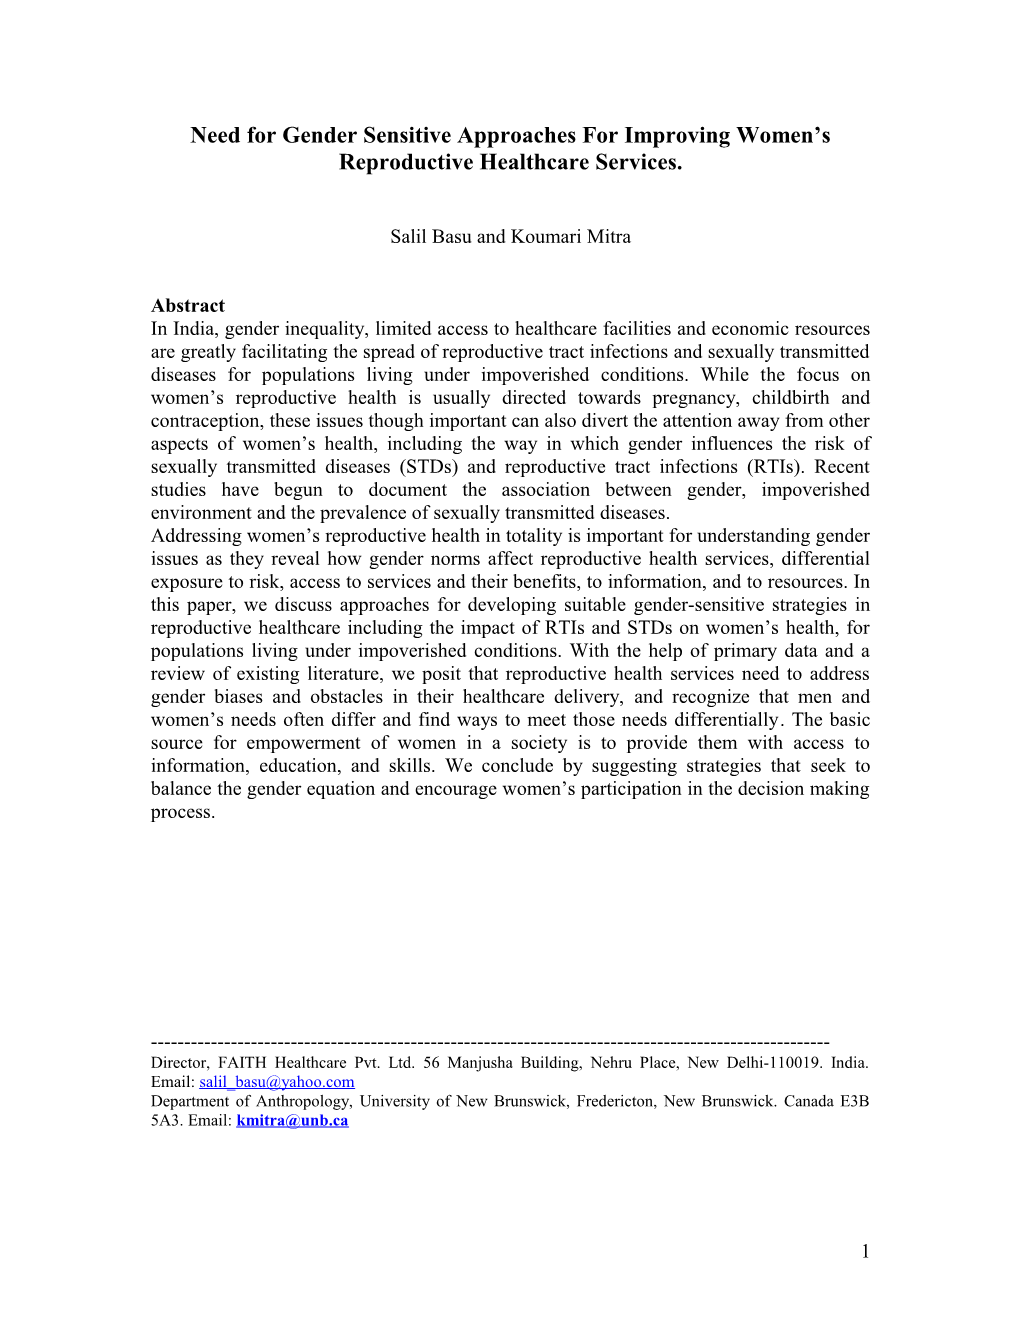 Title: Need for Gender Sensitive Approaches for Improving Women S Reproductive Healthcare